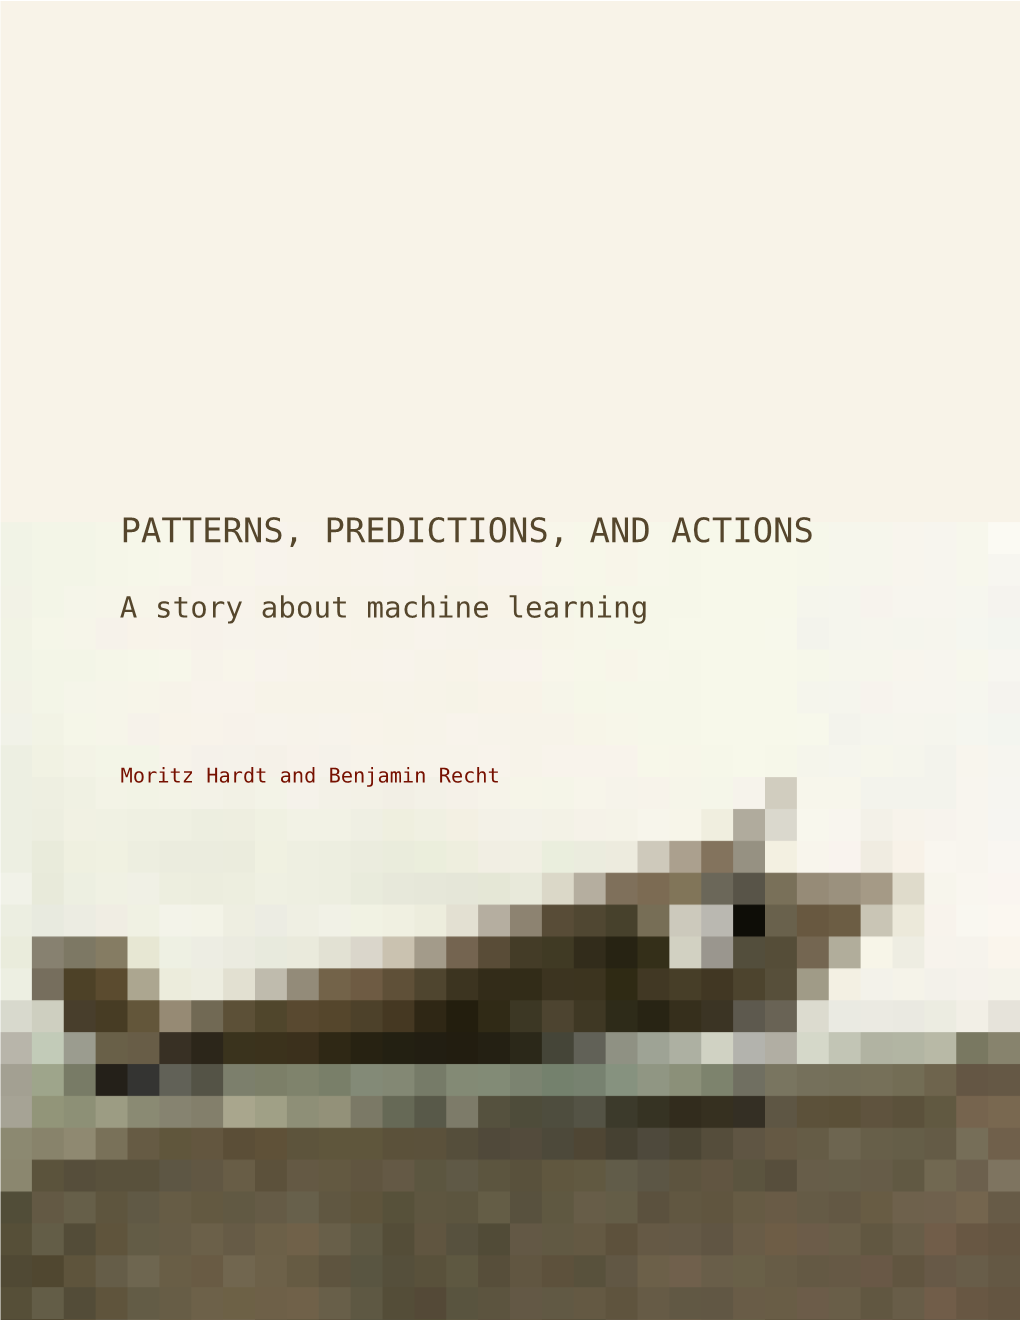 A Story About Machine Learning